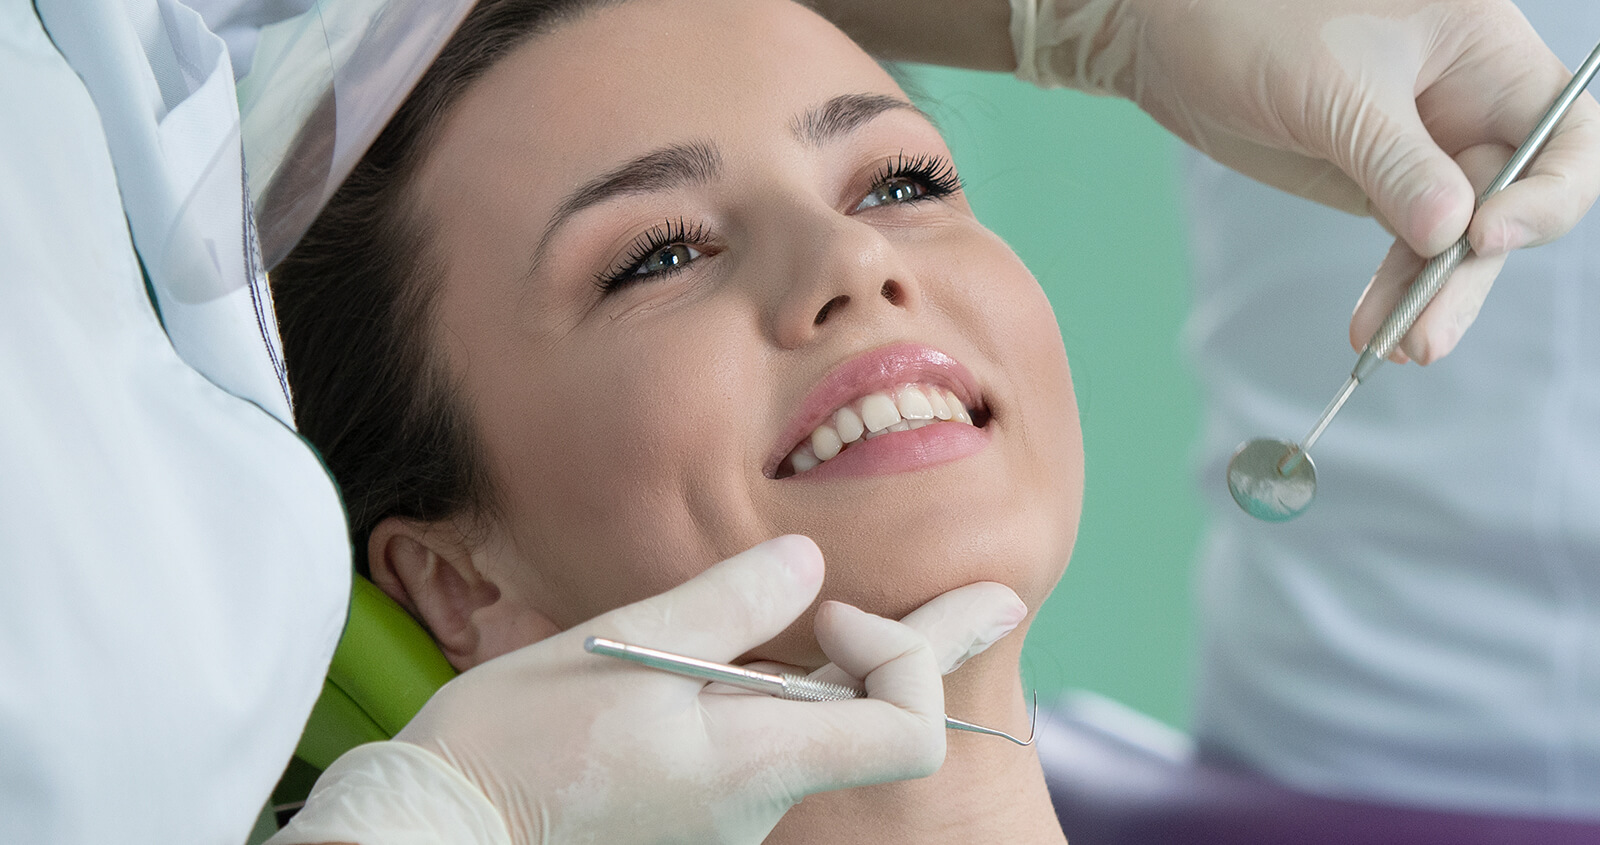 Ozone dental therapy to prevent and treat oral health issues in Overland Park, Kansas